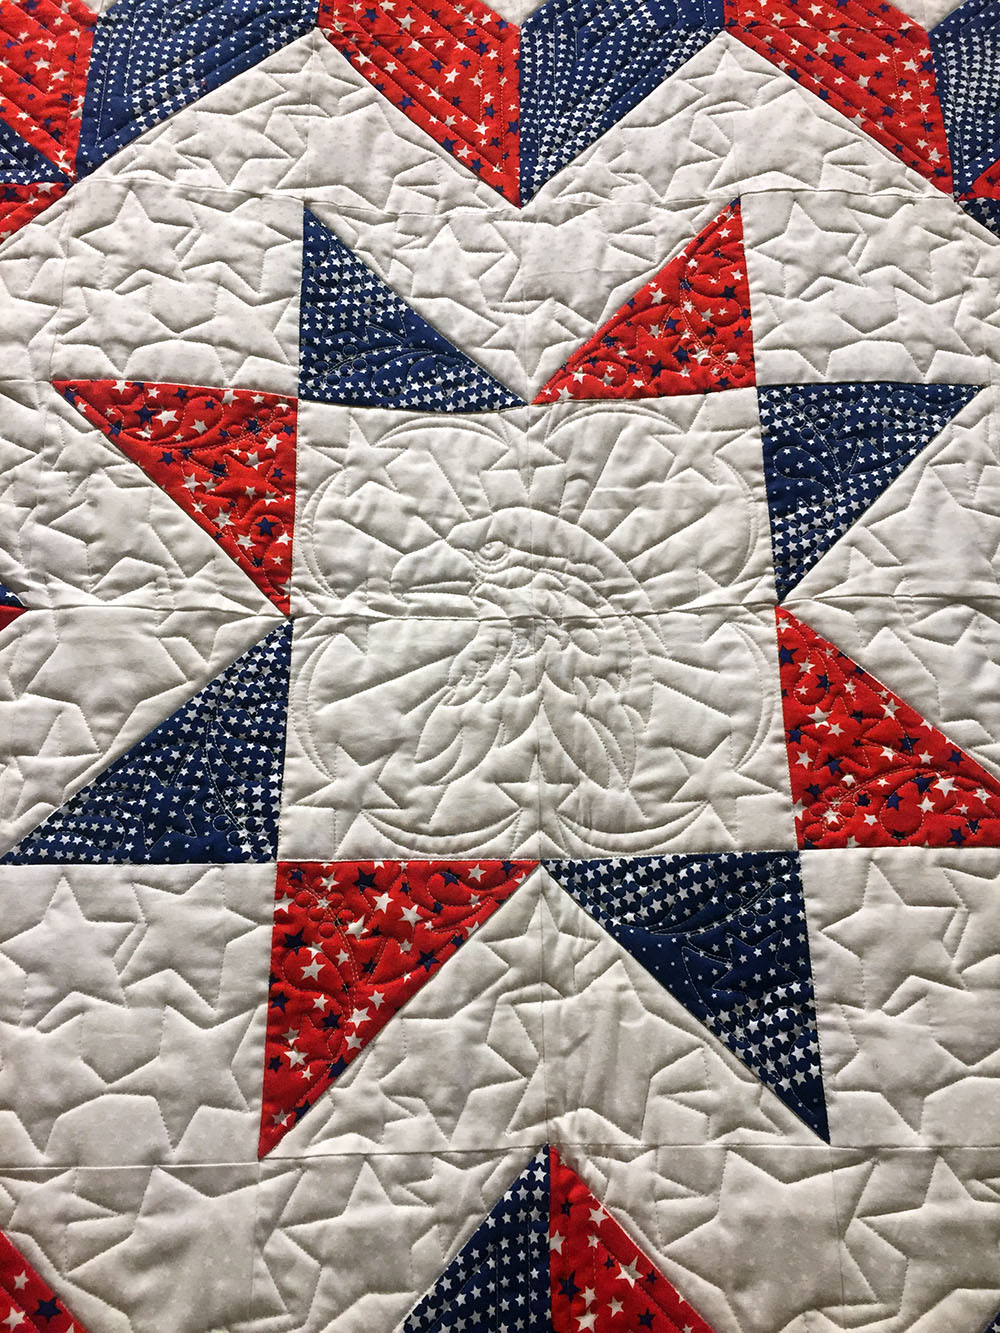 Detail of a red, white and blue embroidered quilt at the Iowa Quilt Museum in Winterset, Iowa